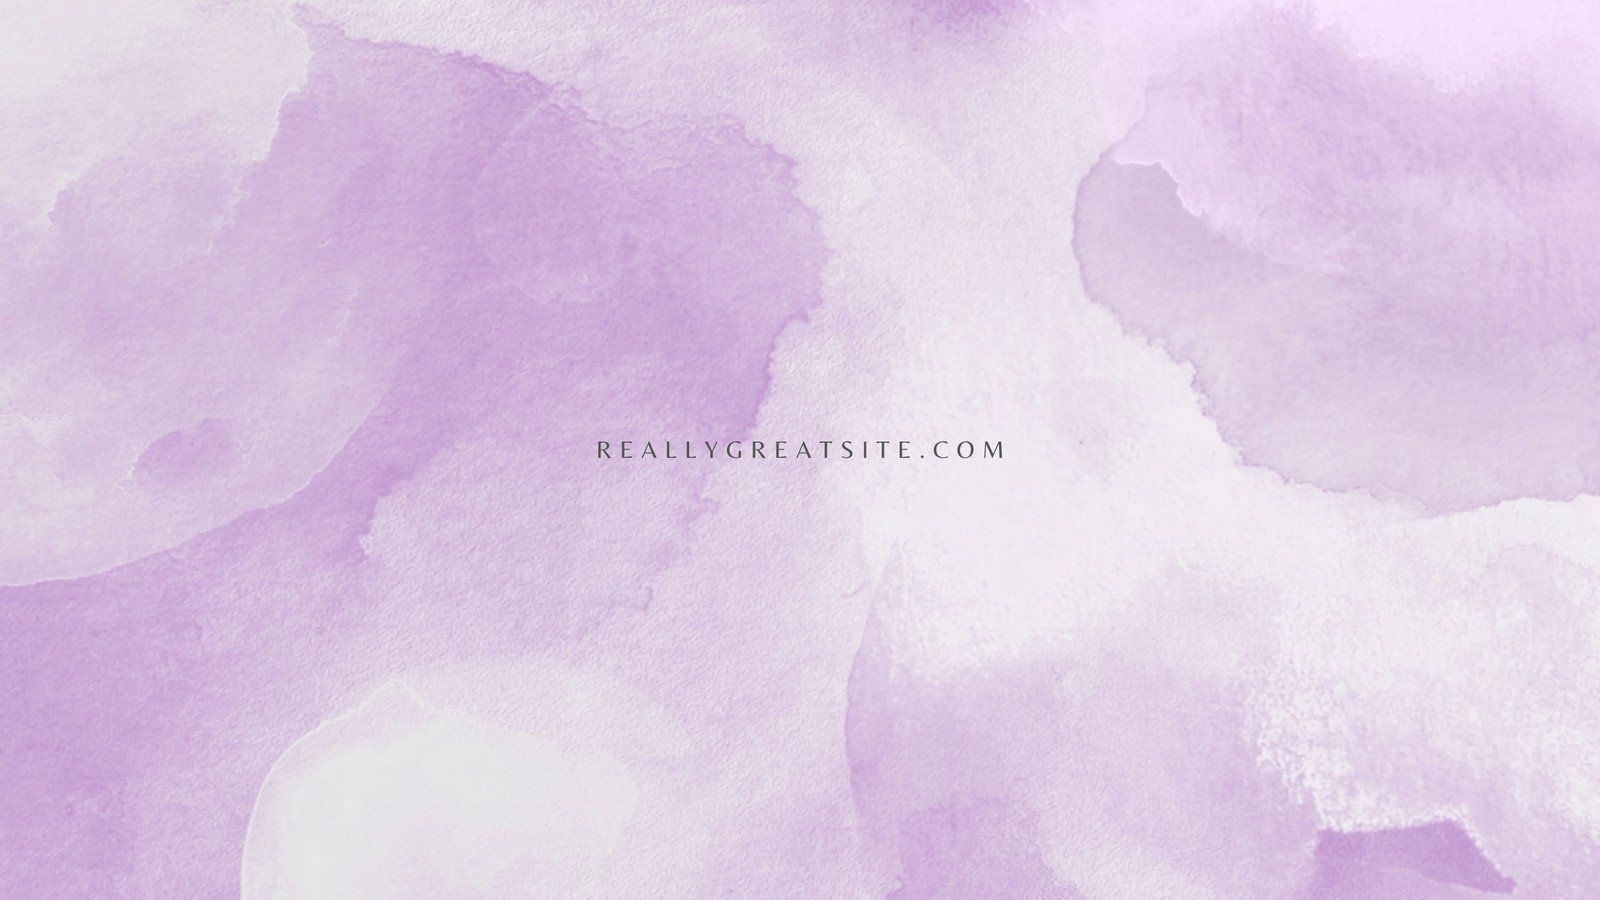 A watercolor texture background image in light purple and white. - Watercolor